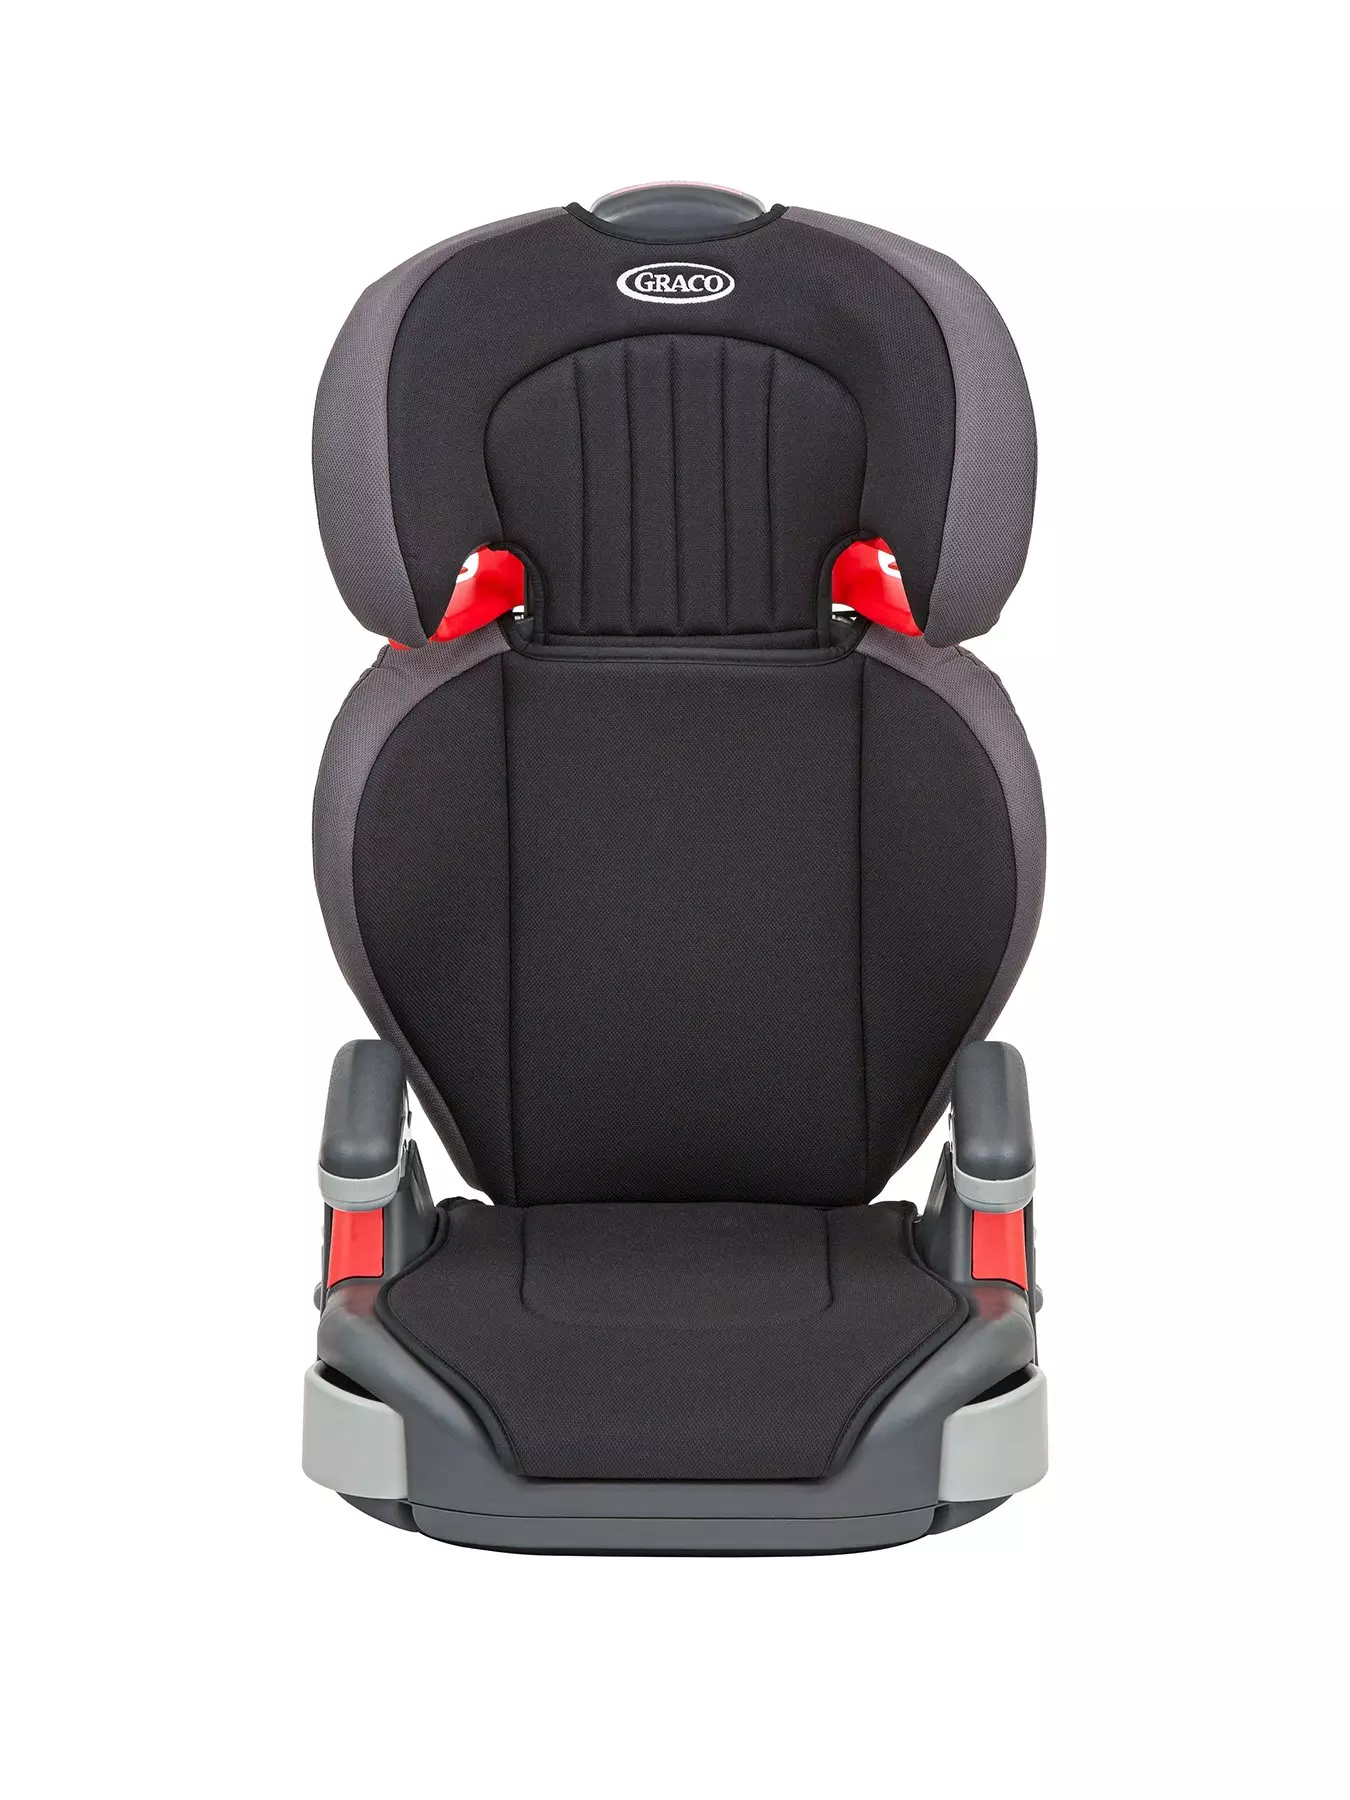 Graco Affix High Back Booster Car Seat, Black/Red